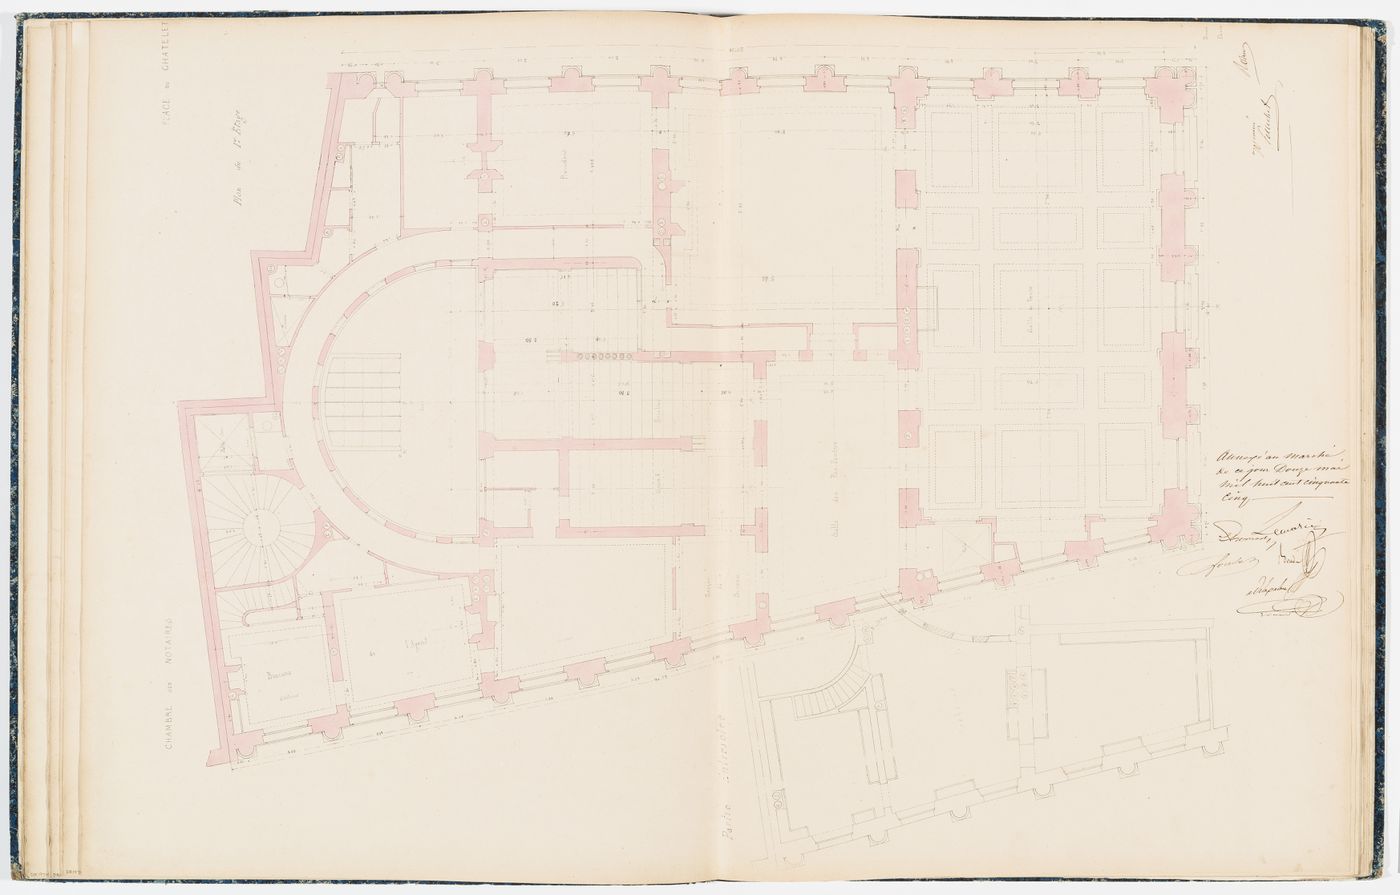 Contract drawing for the Chambre des Notaires: First floor plan